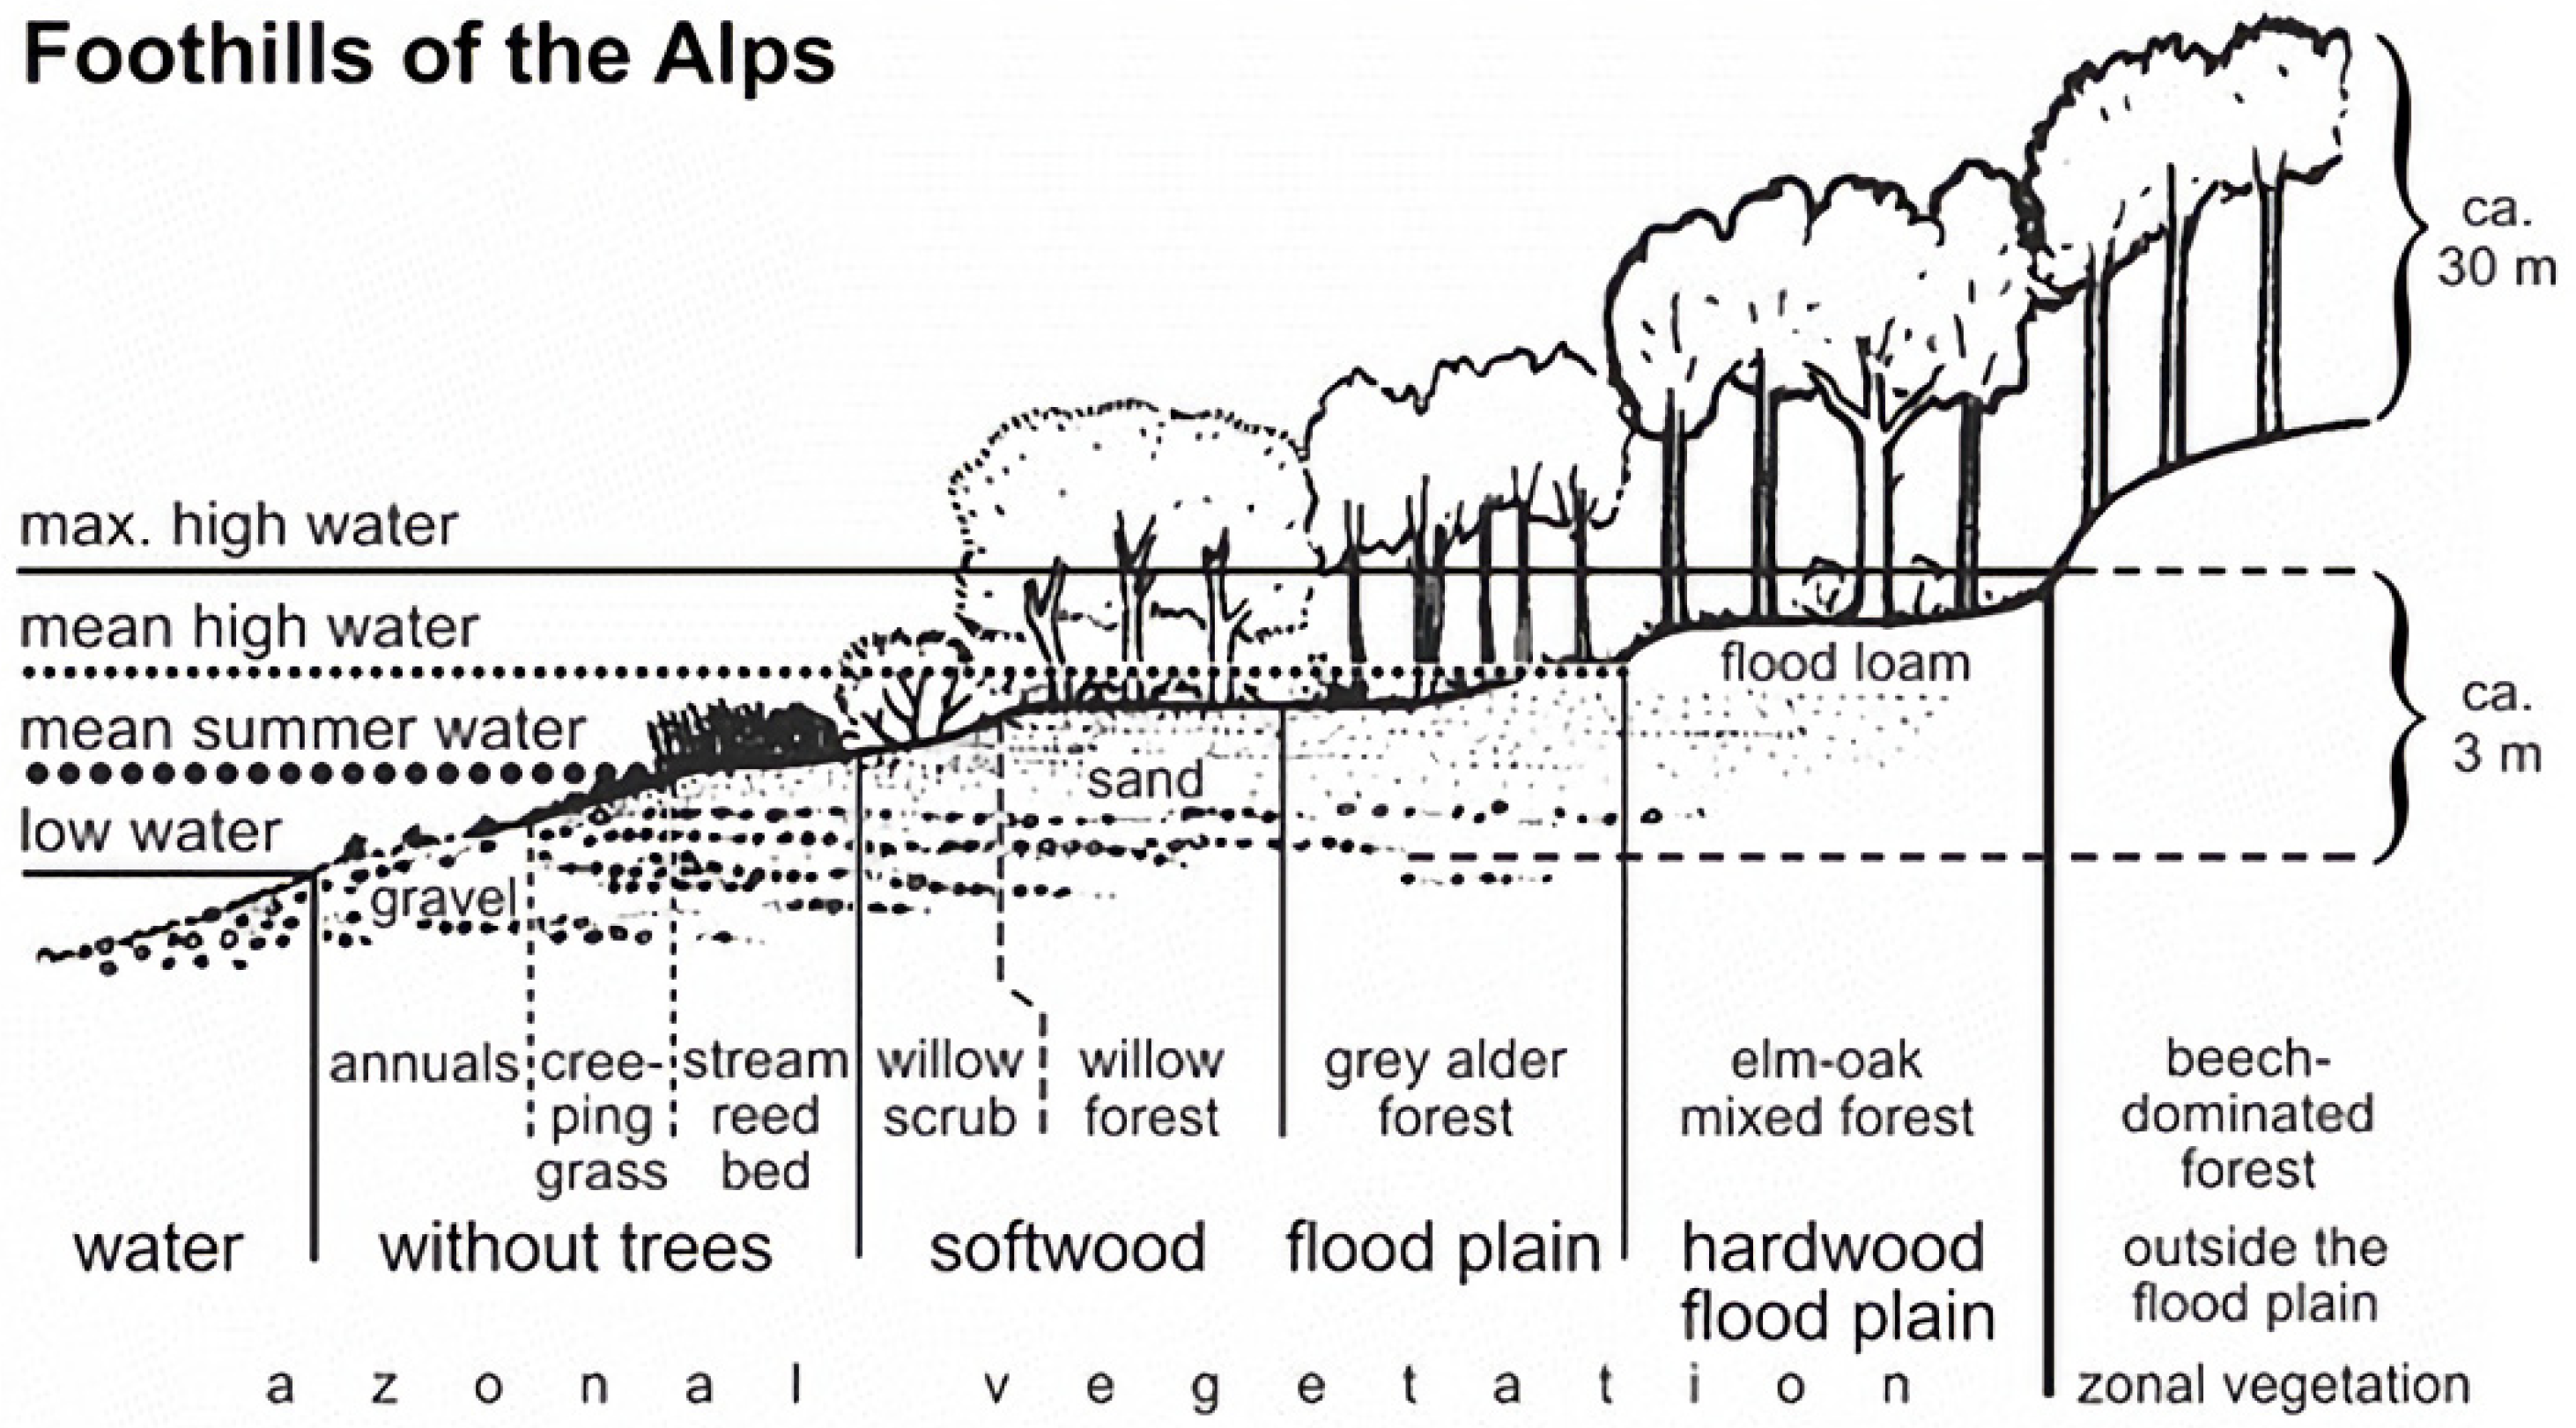 21. What do steeper slopes mean in species richness v/s area graph ?